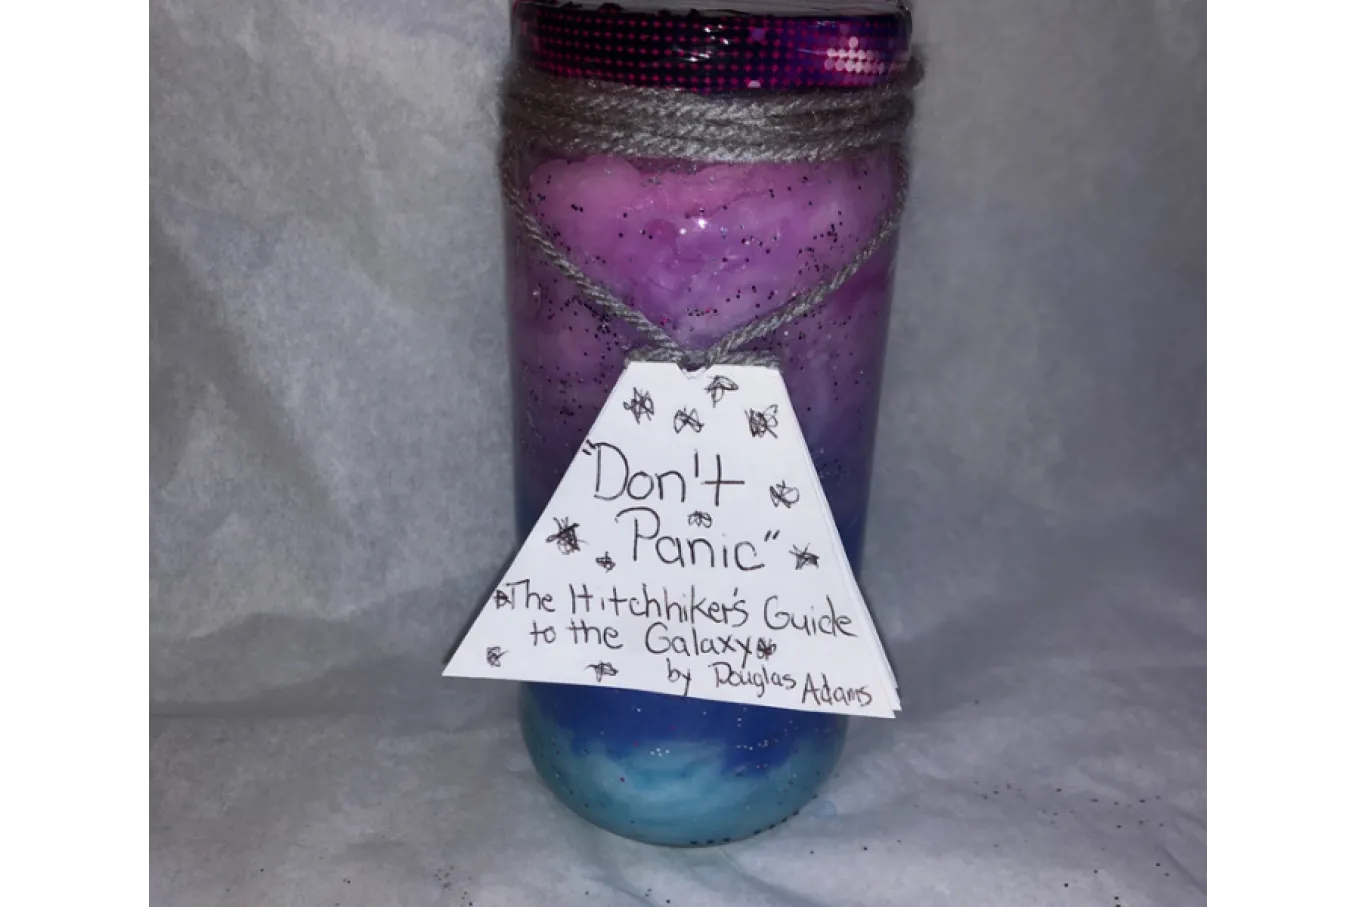 Mason Jar with different color cotton (pink, purple, periwinkle, and blue) and glitter (silver and purple) inside. A note hangs on grey yarn and says "Don't Panic" The Hitchhikers Guide to the Galaxy by Douglas Adams